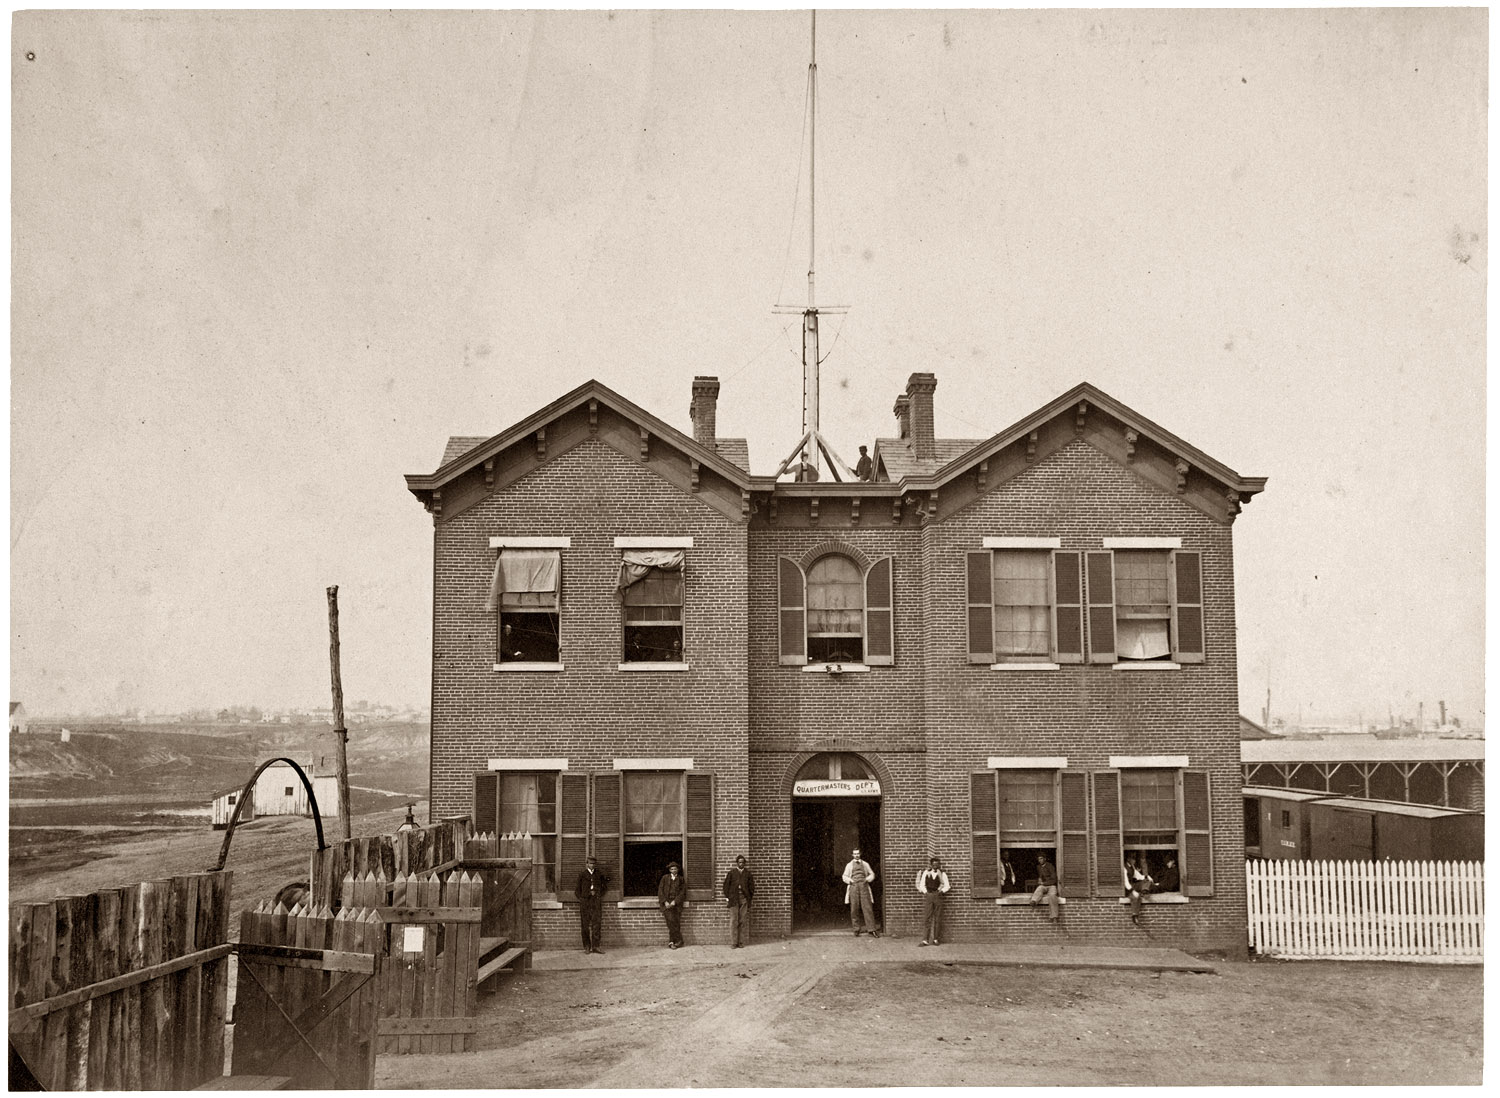 U.S. Army Quartermaster's Department, Alexandria, Virginia. View full size. Albumen print from a photograph by Andrew J. Russell taken during the Civil War (1861-1865). Note the elaborate signal mast on the roof.